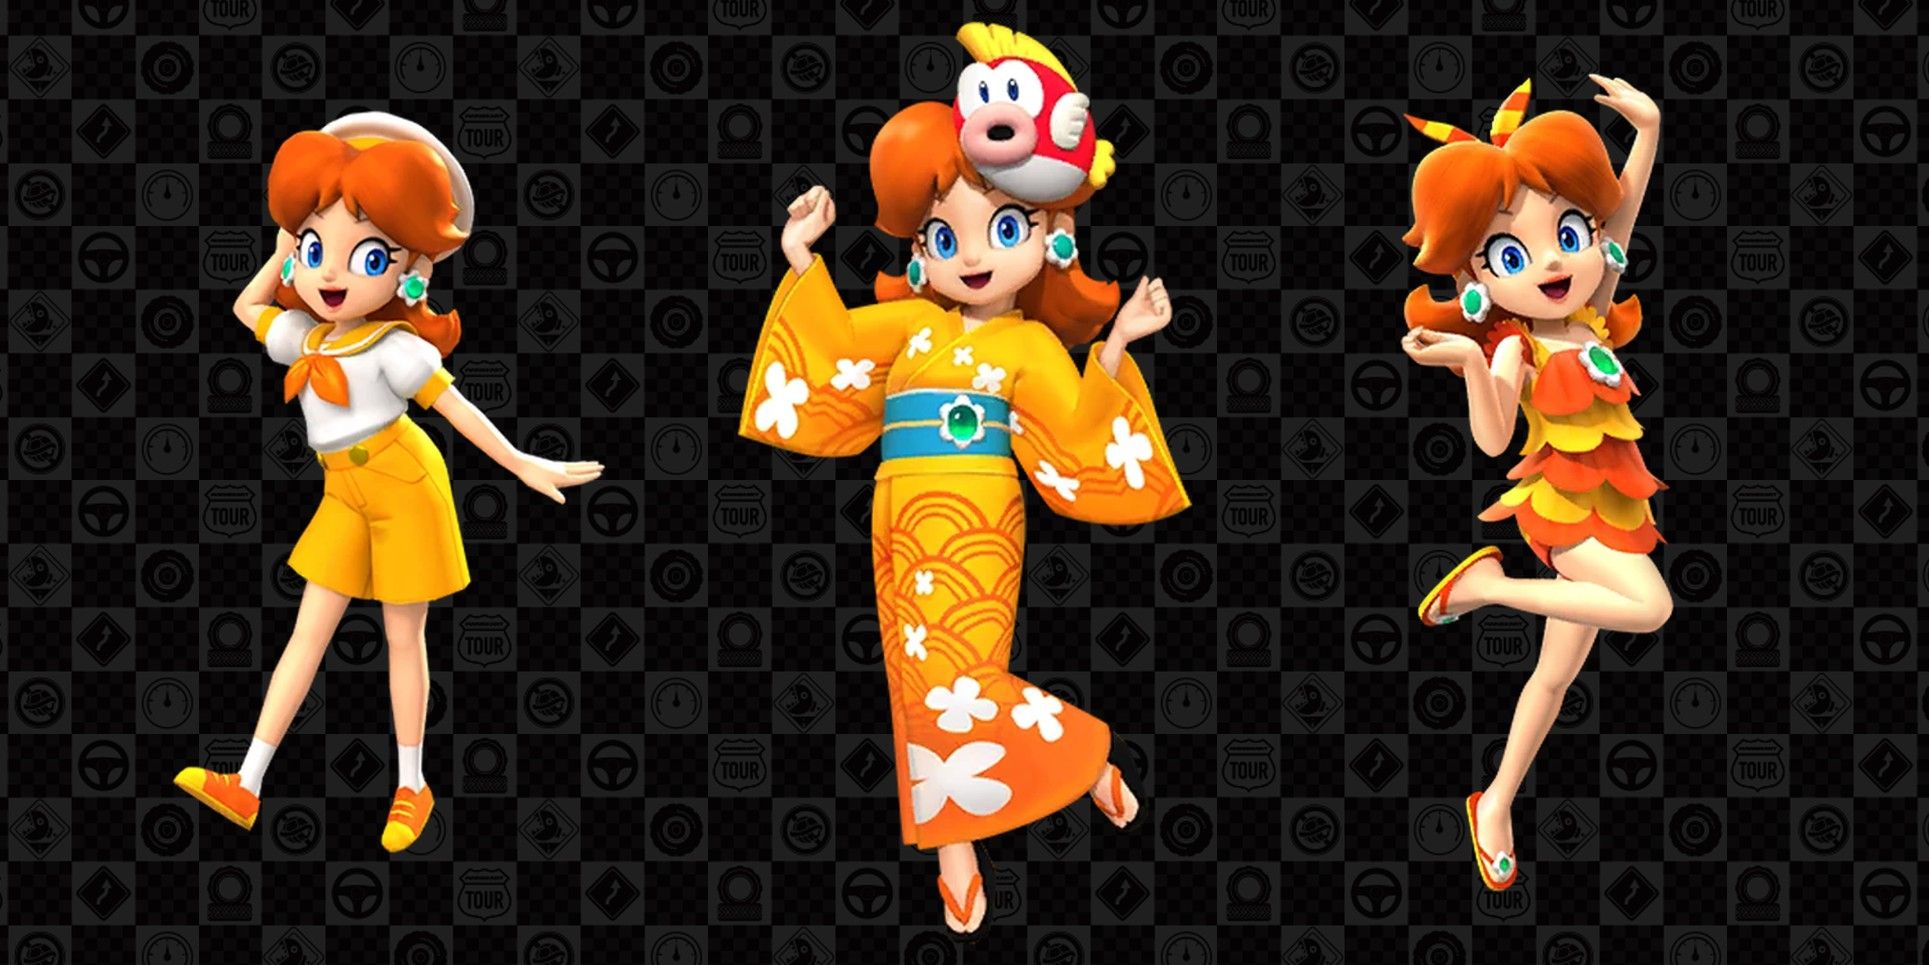 claudia saab recommends mario brothers daisy costumes pic